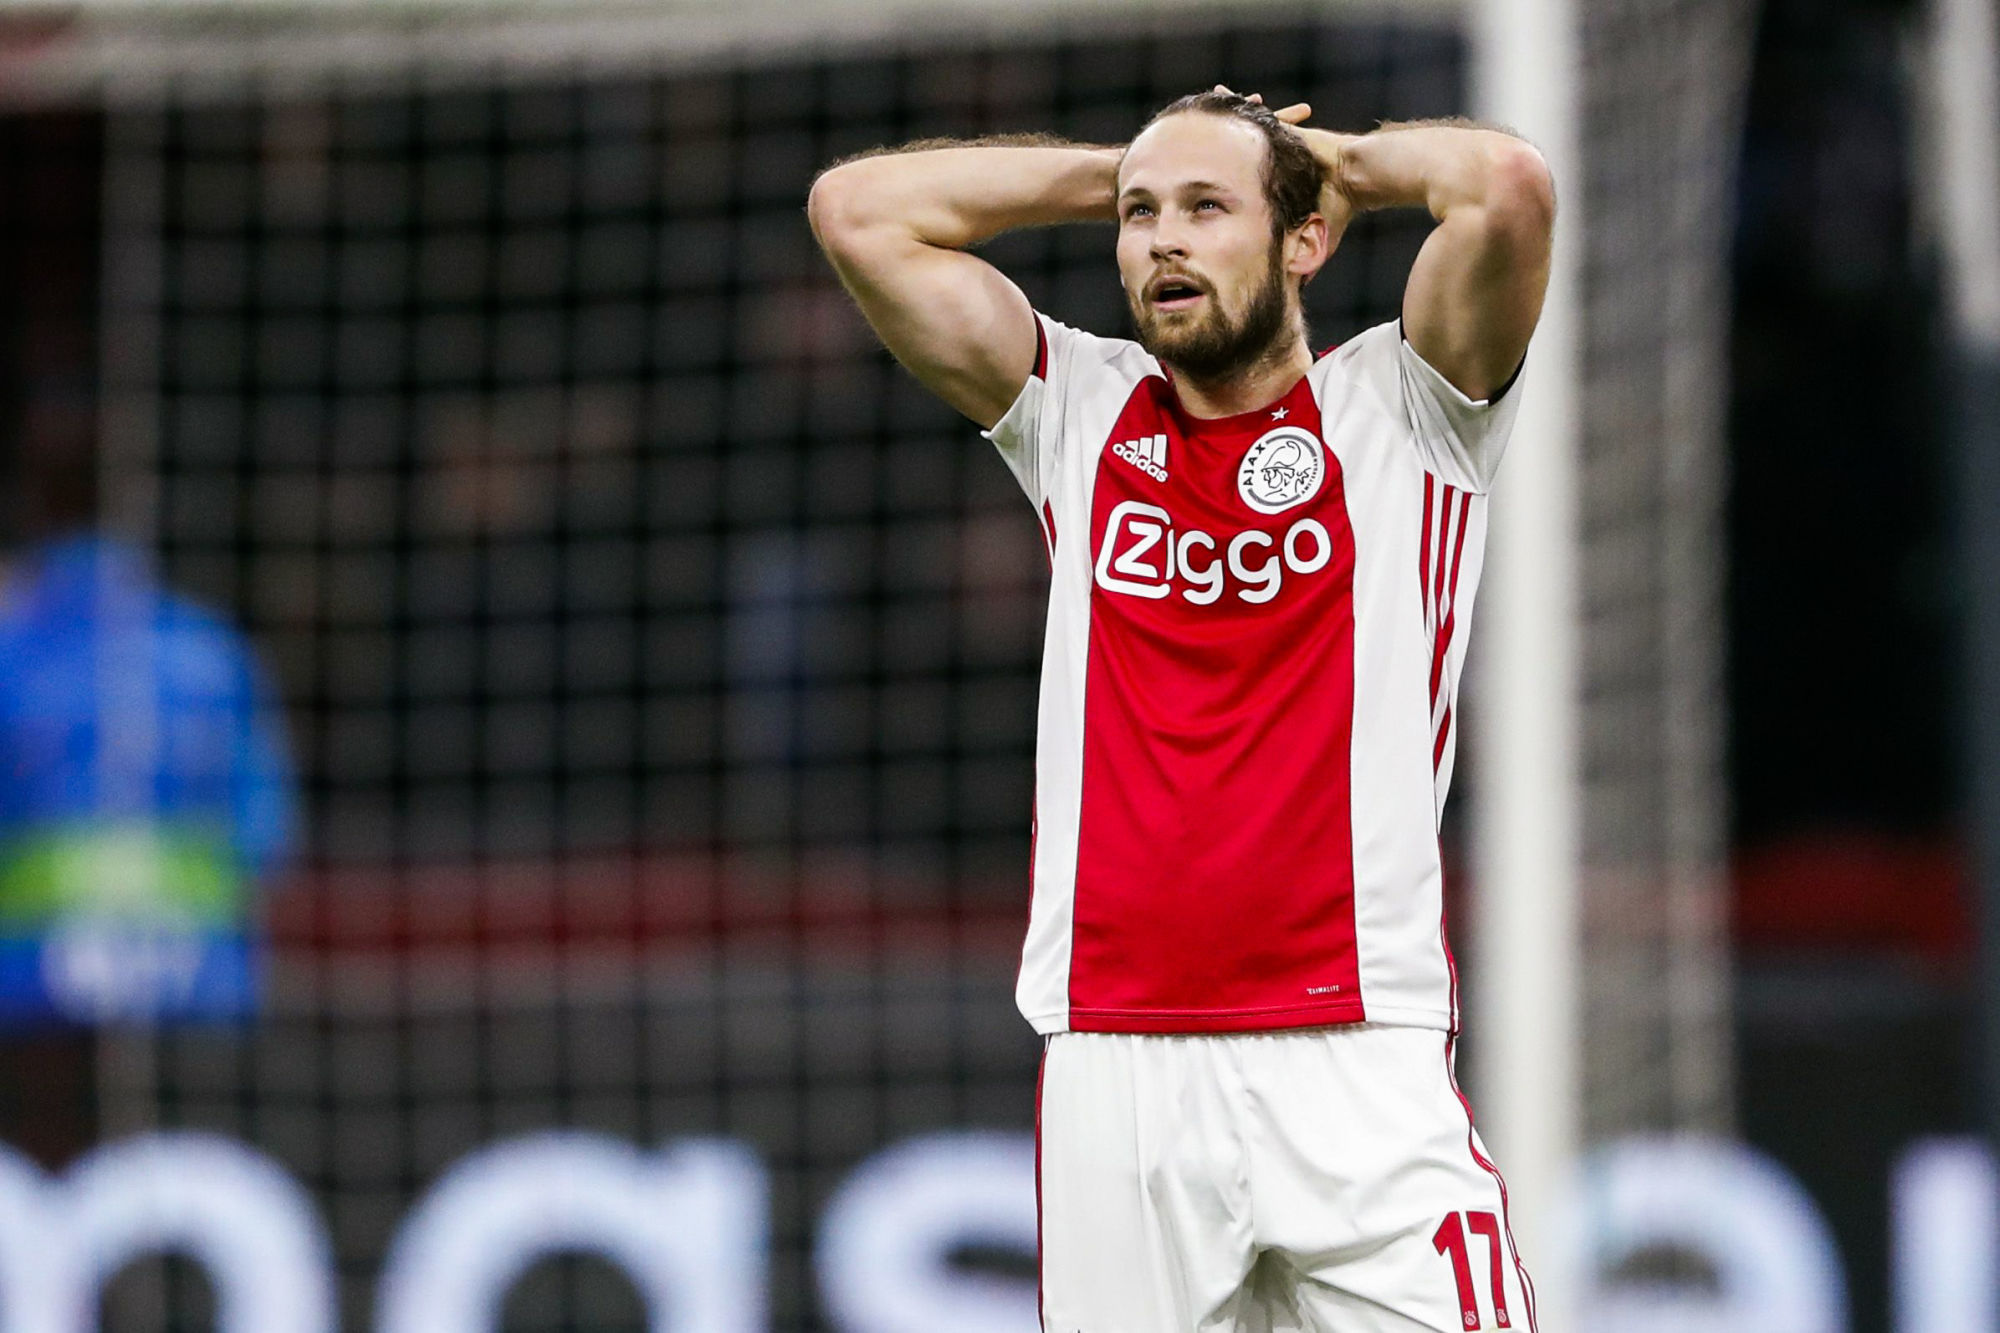 Daley Blind of Ajax during the UEFA Champions League group H match between Ajax Amsterdam and Valencia CF at the Johan Cruijff Arena on December 11, 2019 in Amsterdam, The Netherlands 
Photo by Icon Sport - Daley BLIND - Johan Cruijff Arena - Amsterdam (Pays Bas)